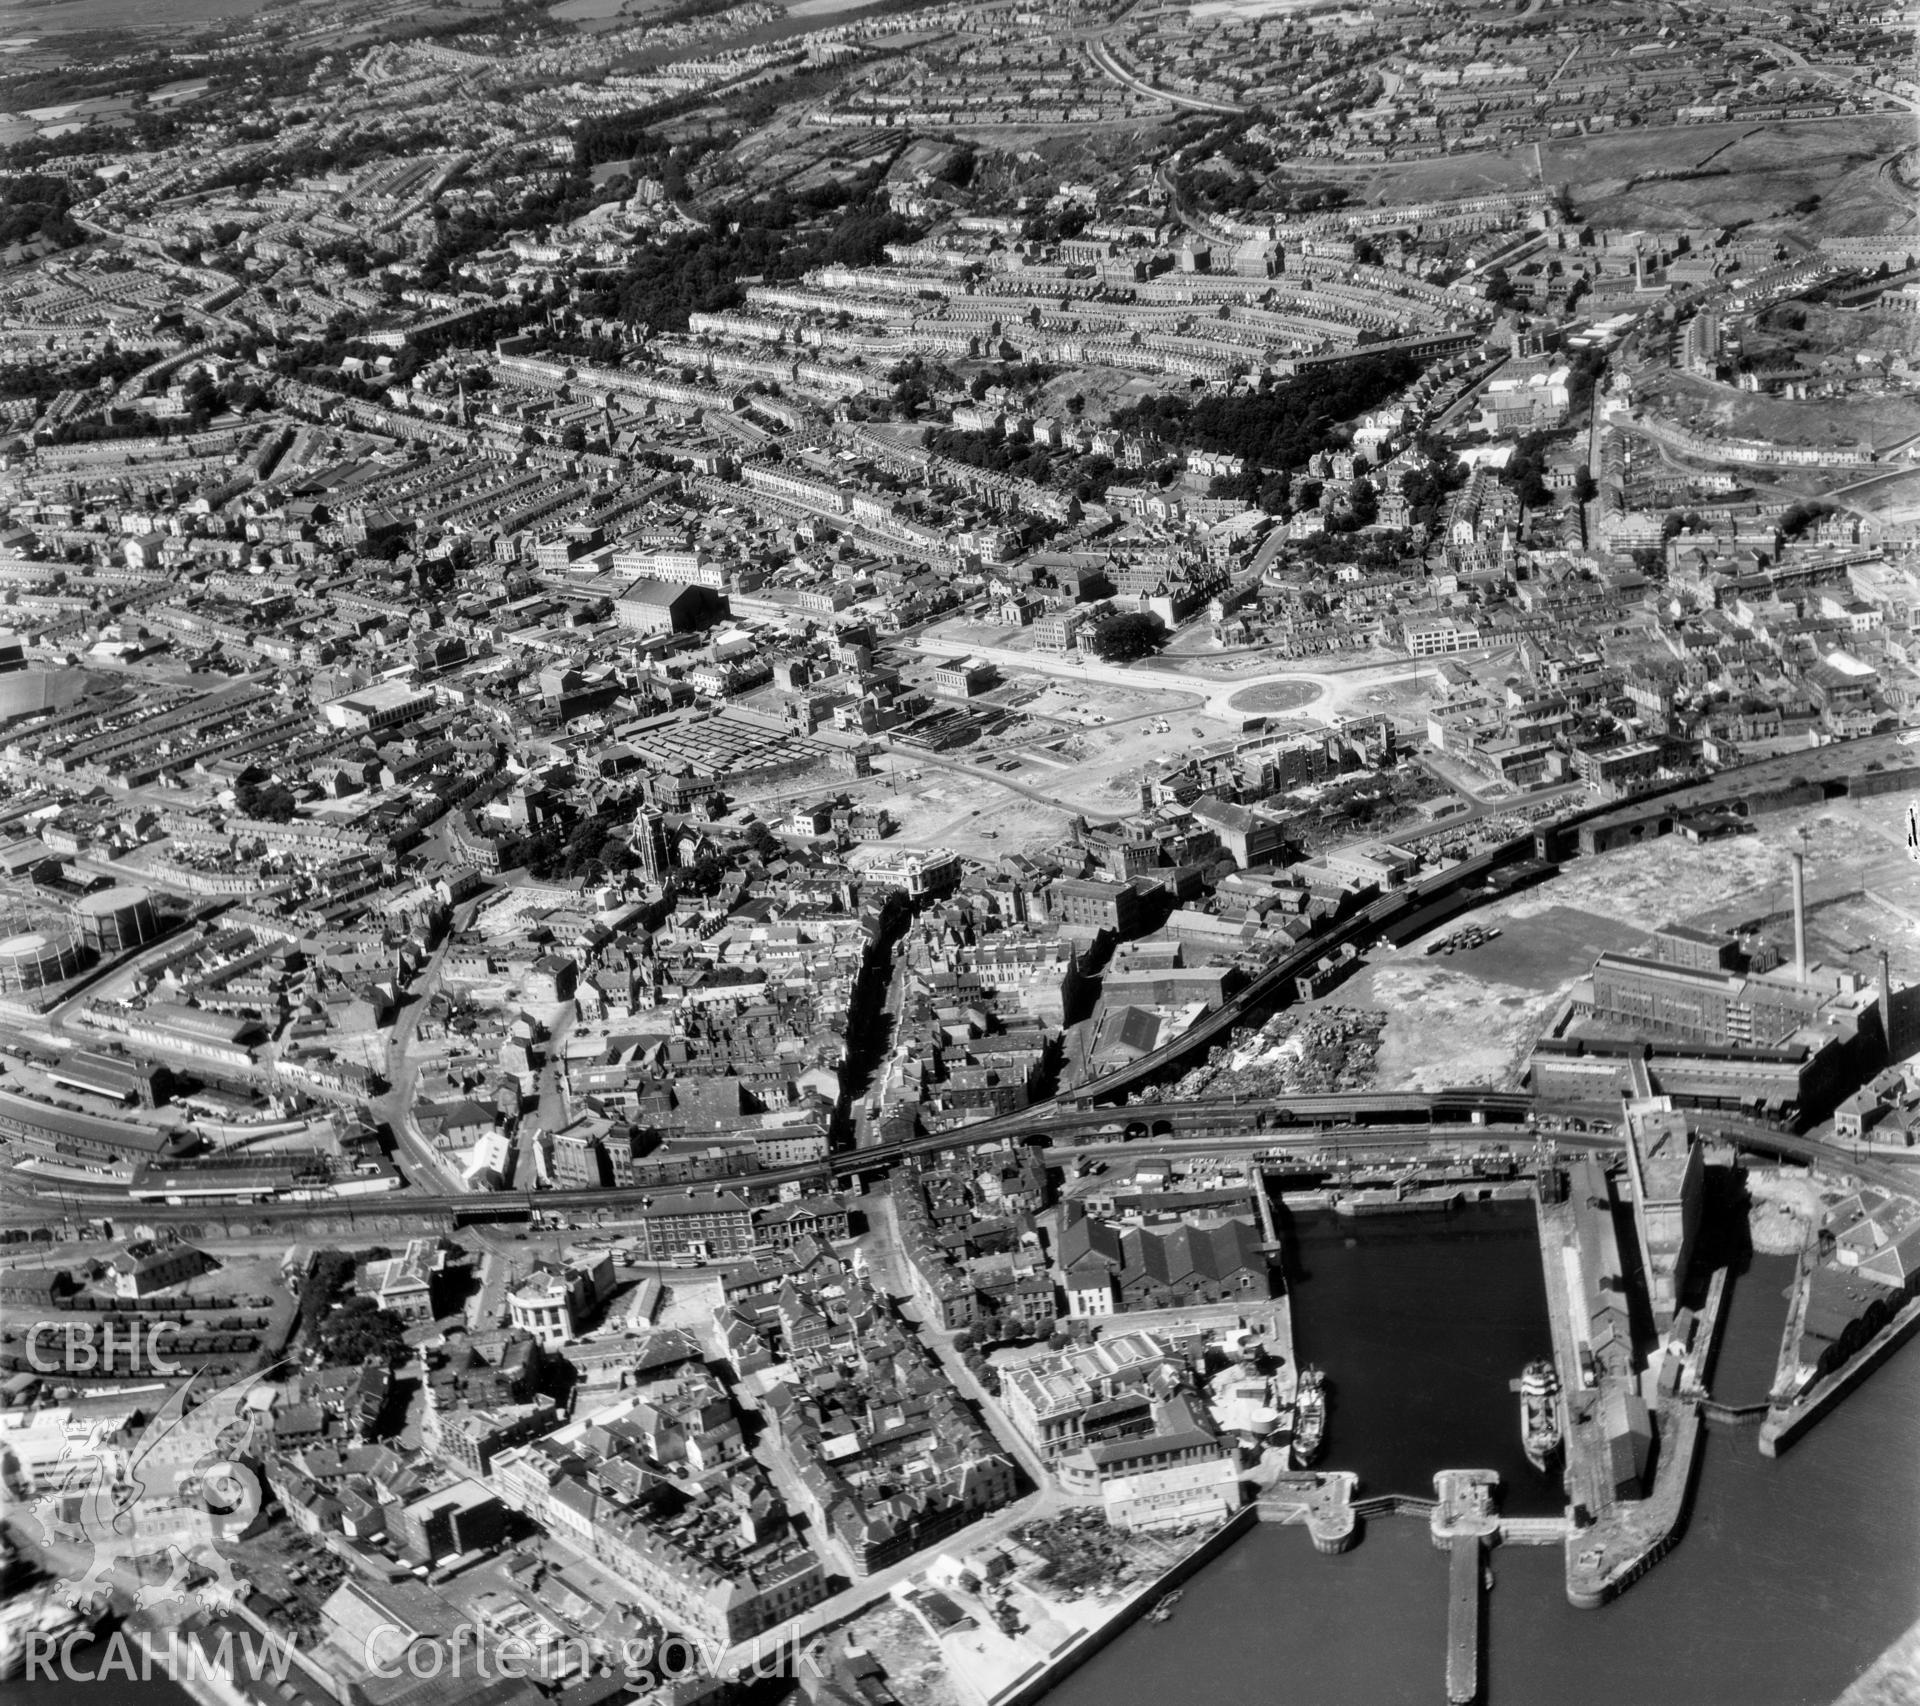 Black and white oblique aerial photograph showing Swansea town centre, from Aerofilms album no. W.30, taken by Aero Pictorial Ltd. and dated 7/8/1950.